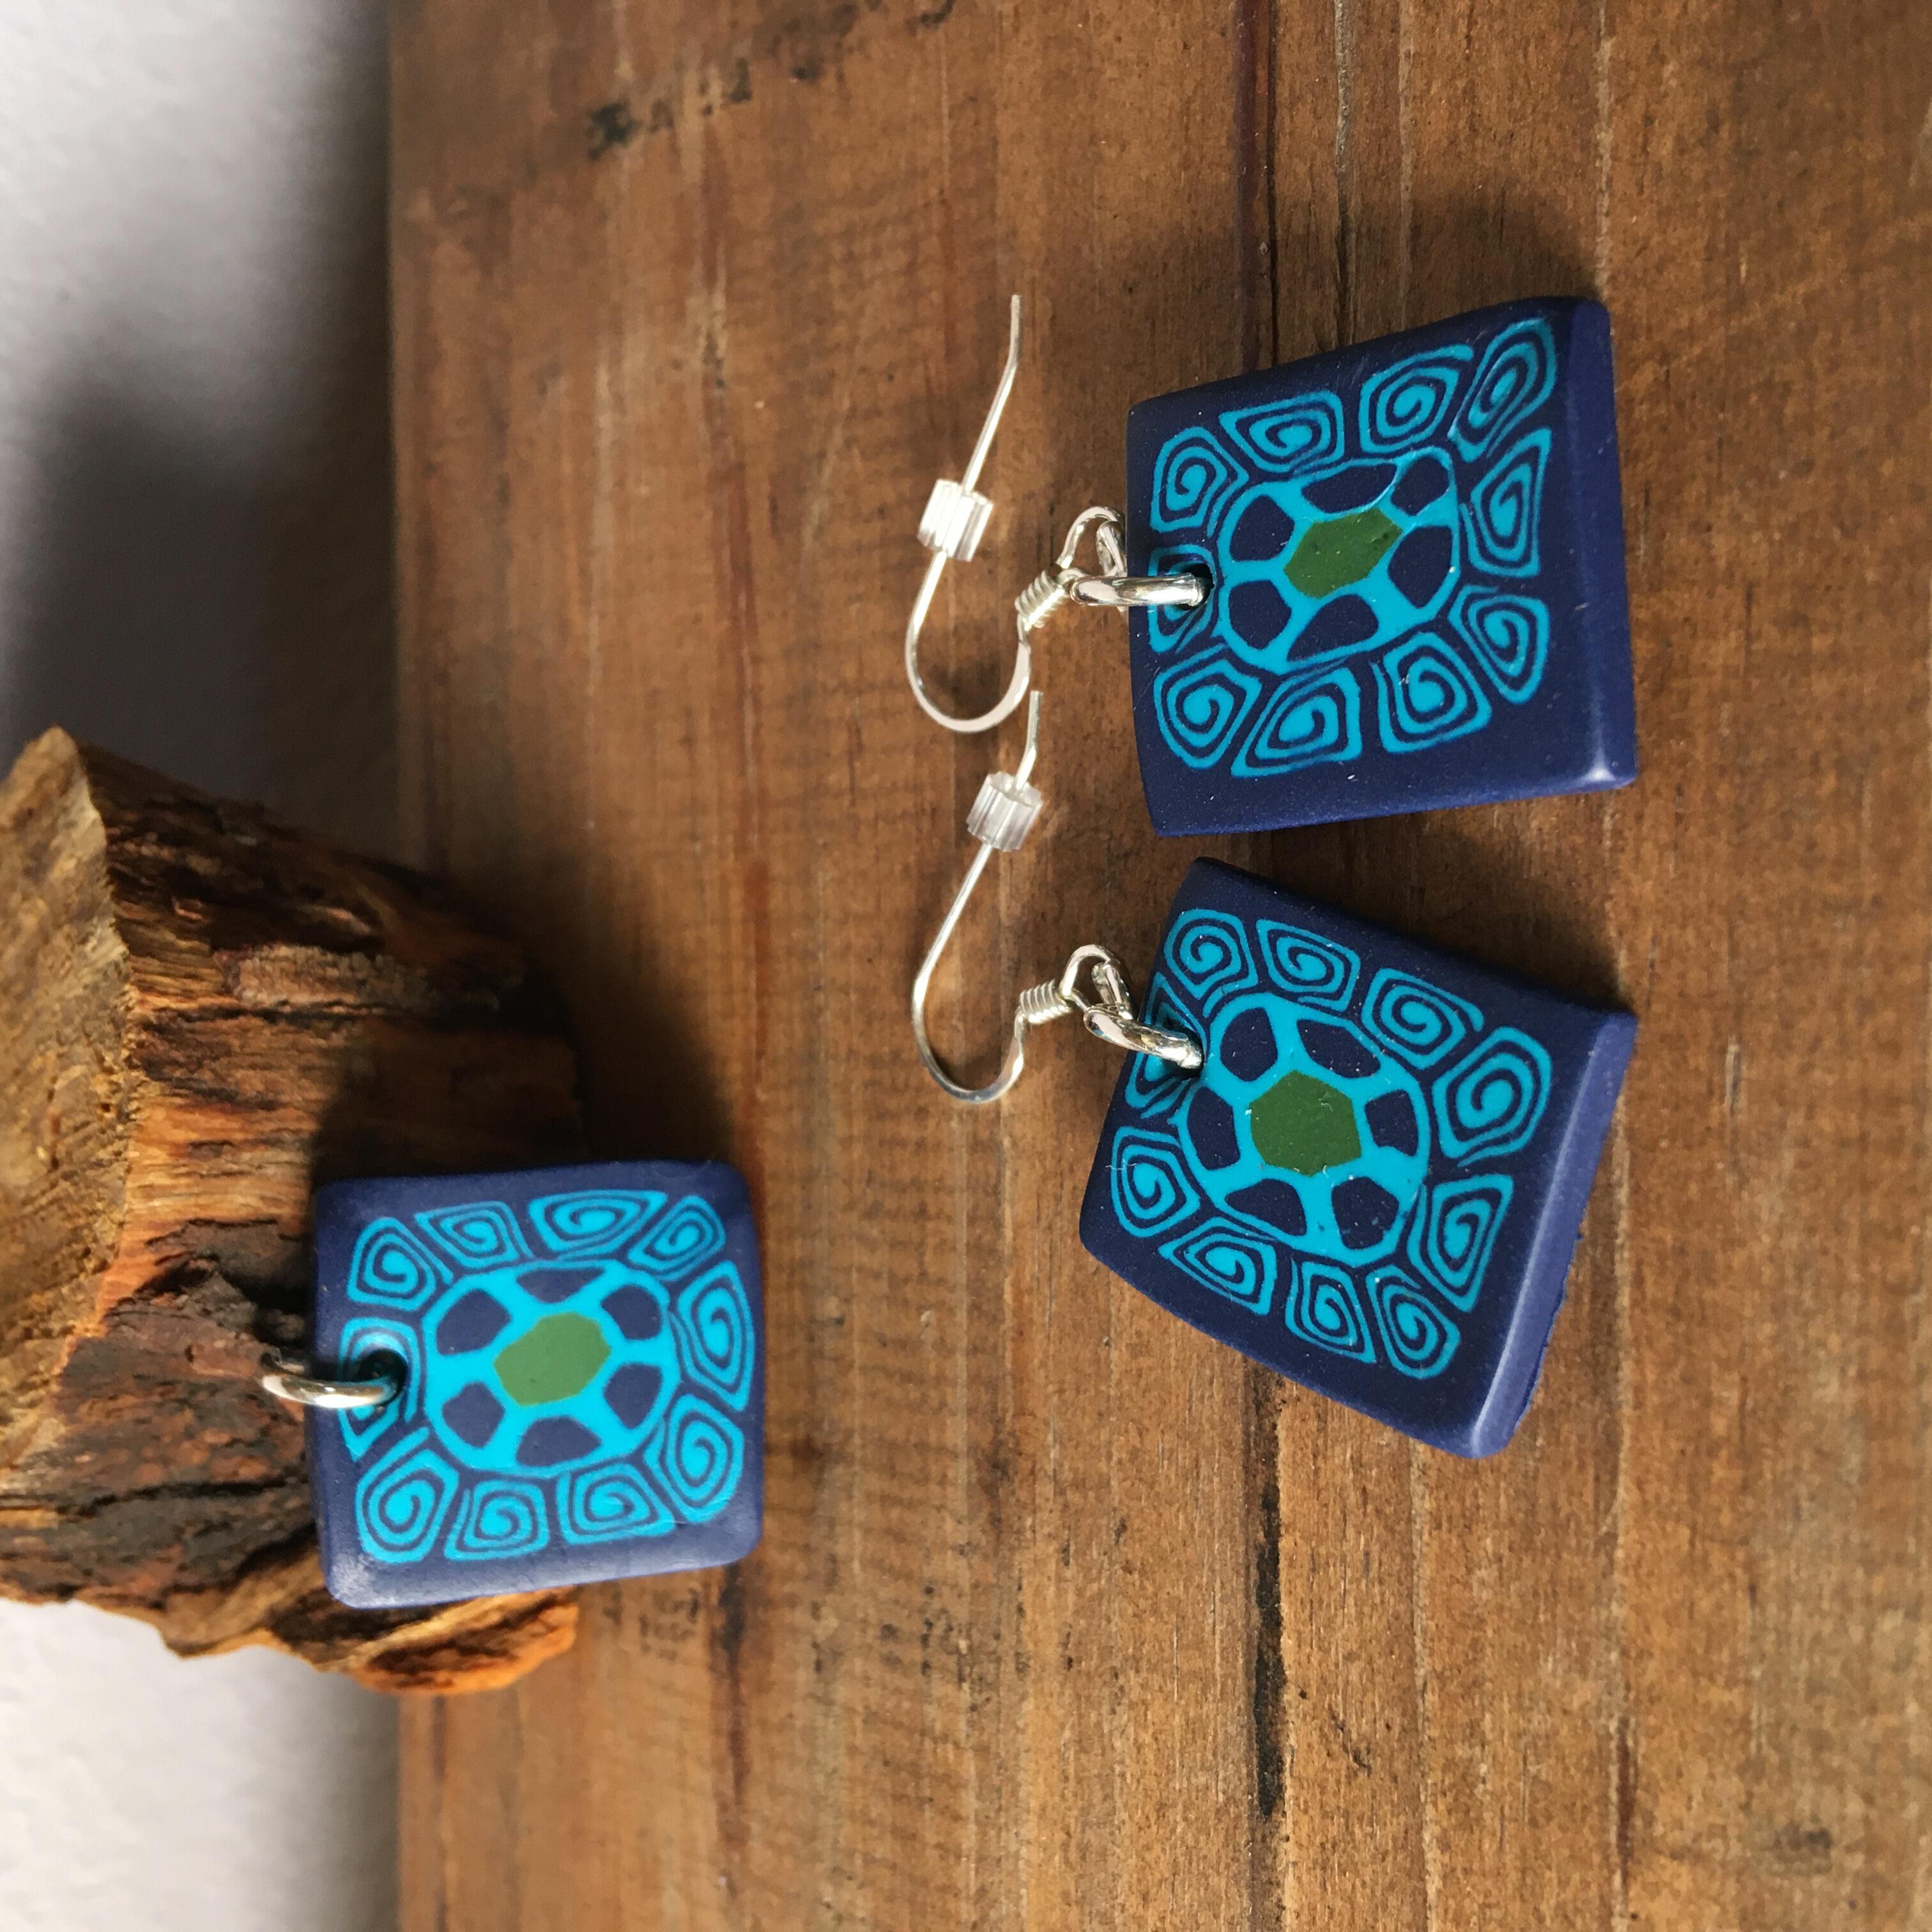 Handmade Clay Earrings to Add to Your Summer Accessory Collection